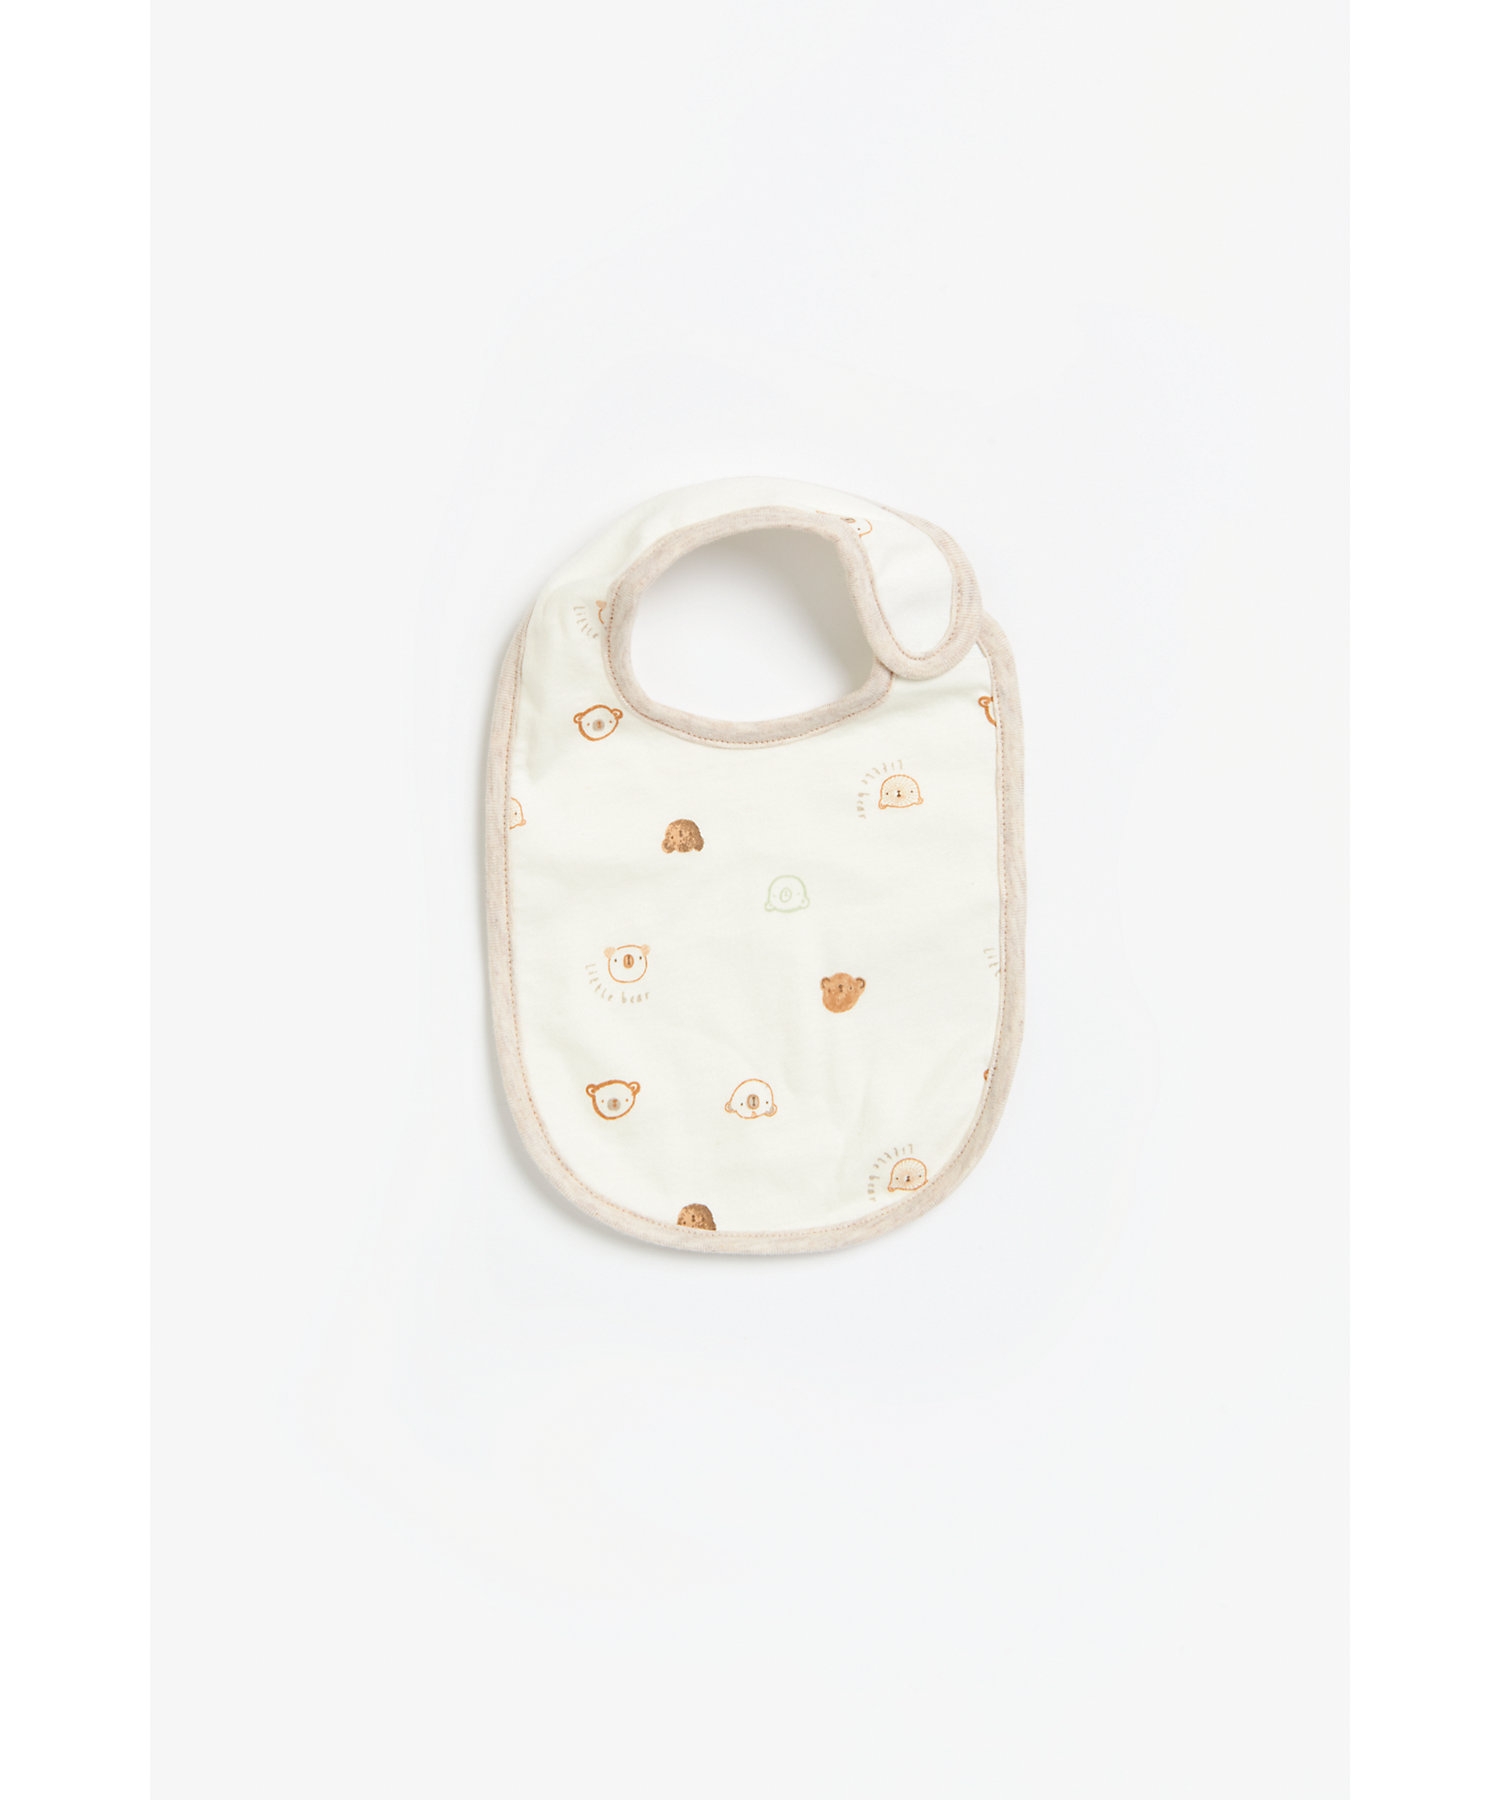 Mothercare | Mothercare Lovable Bear Bibs Multicolor Pack of 3 3